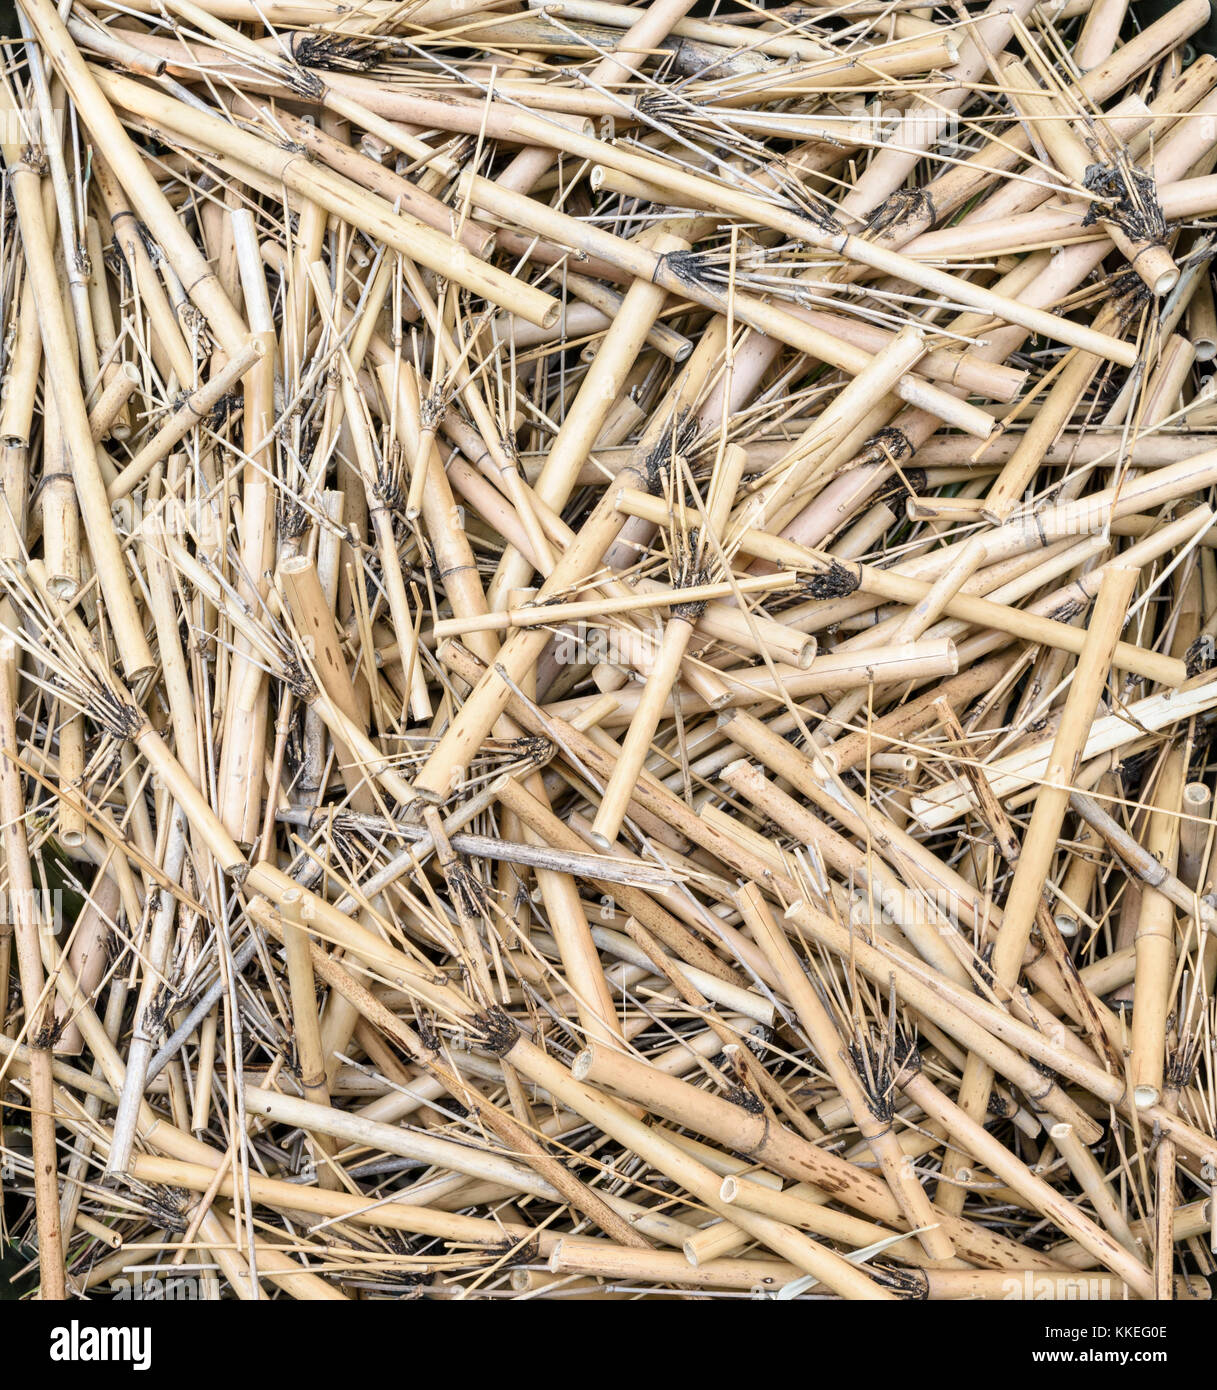 Abstract of dead bamboo stalks cut into pieces Stock Photo